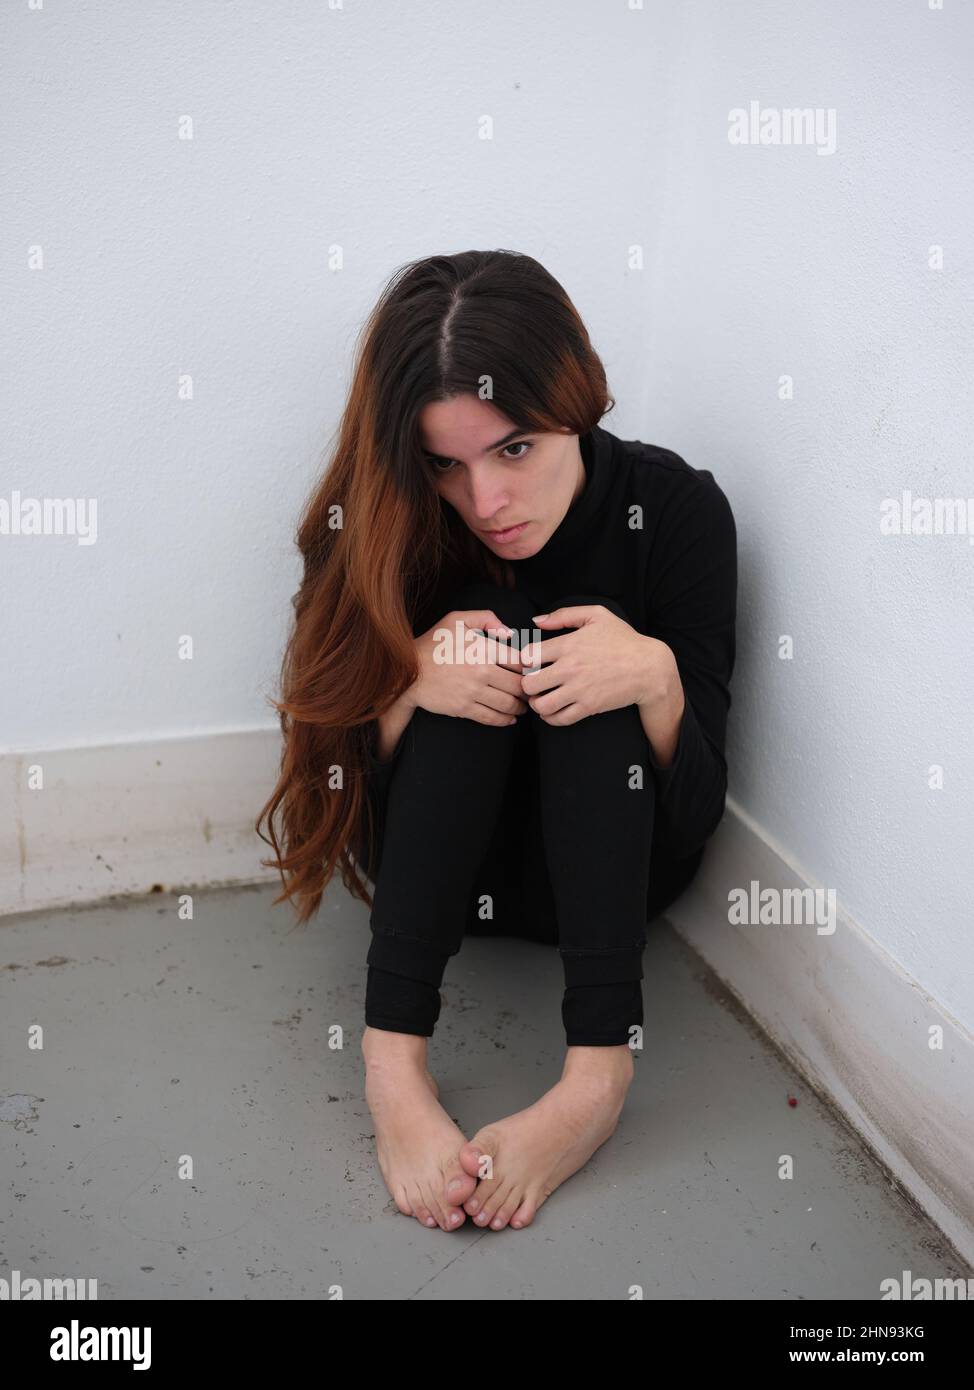 A young woman in the corner of a room dressed in black barefoot looking down in helplessly. Stock Photo